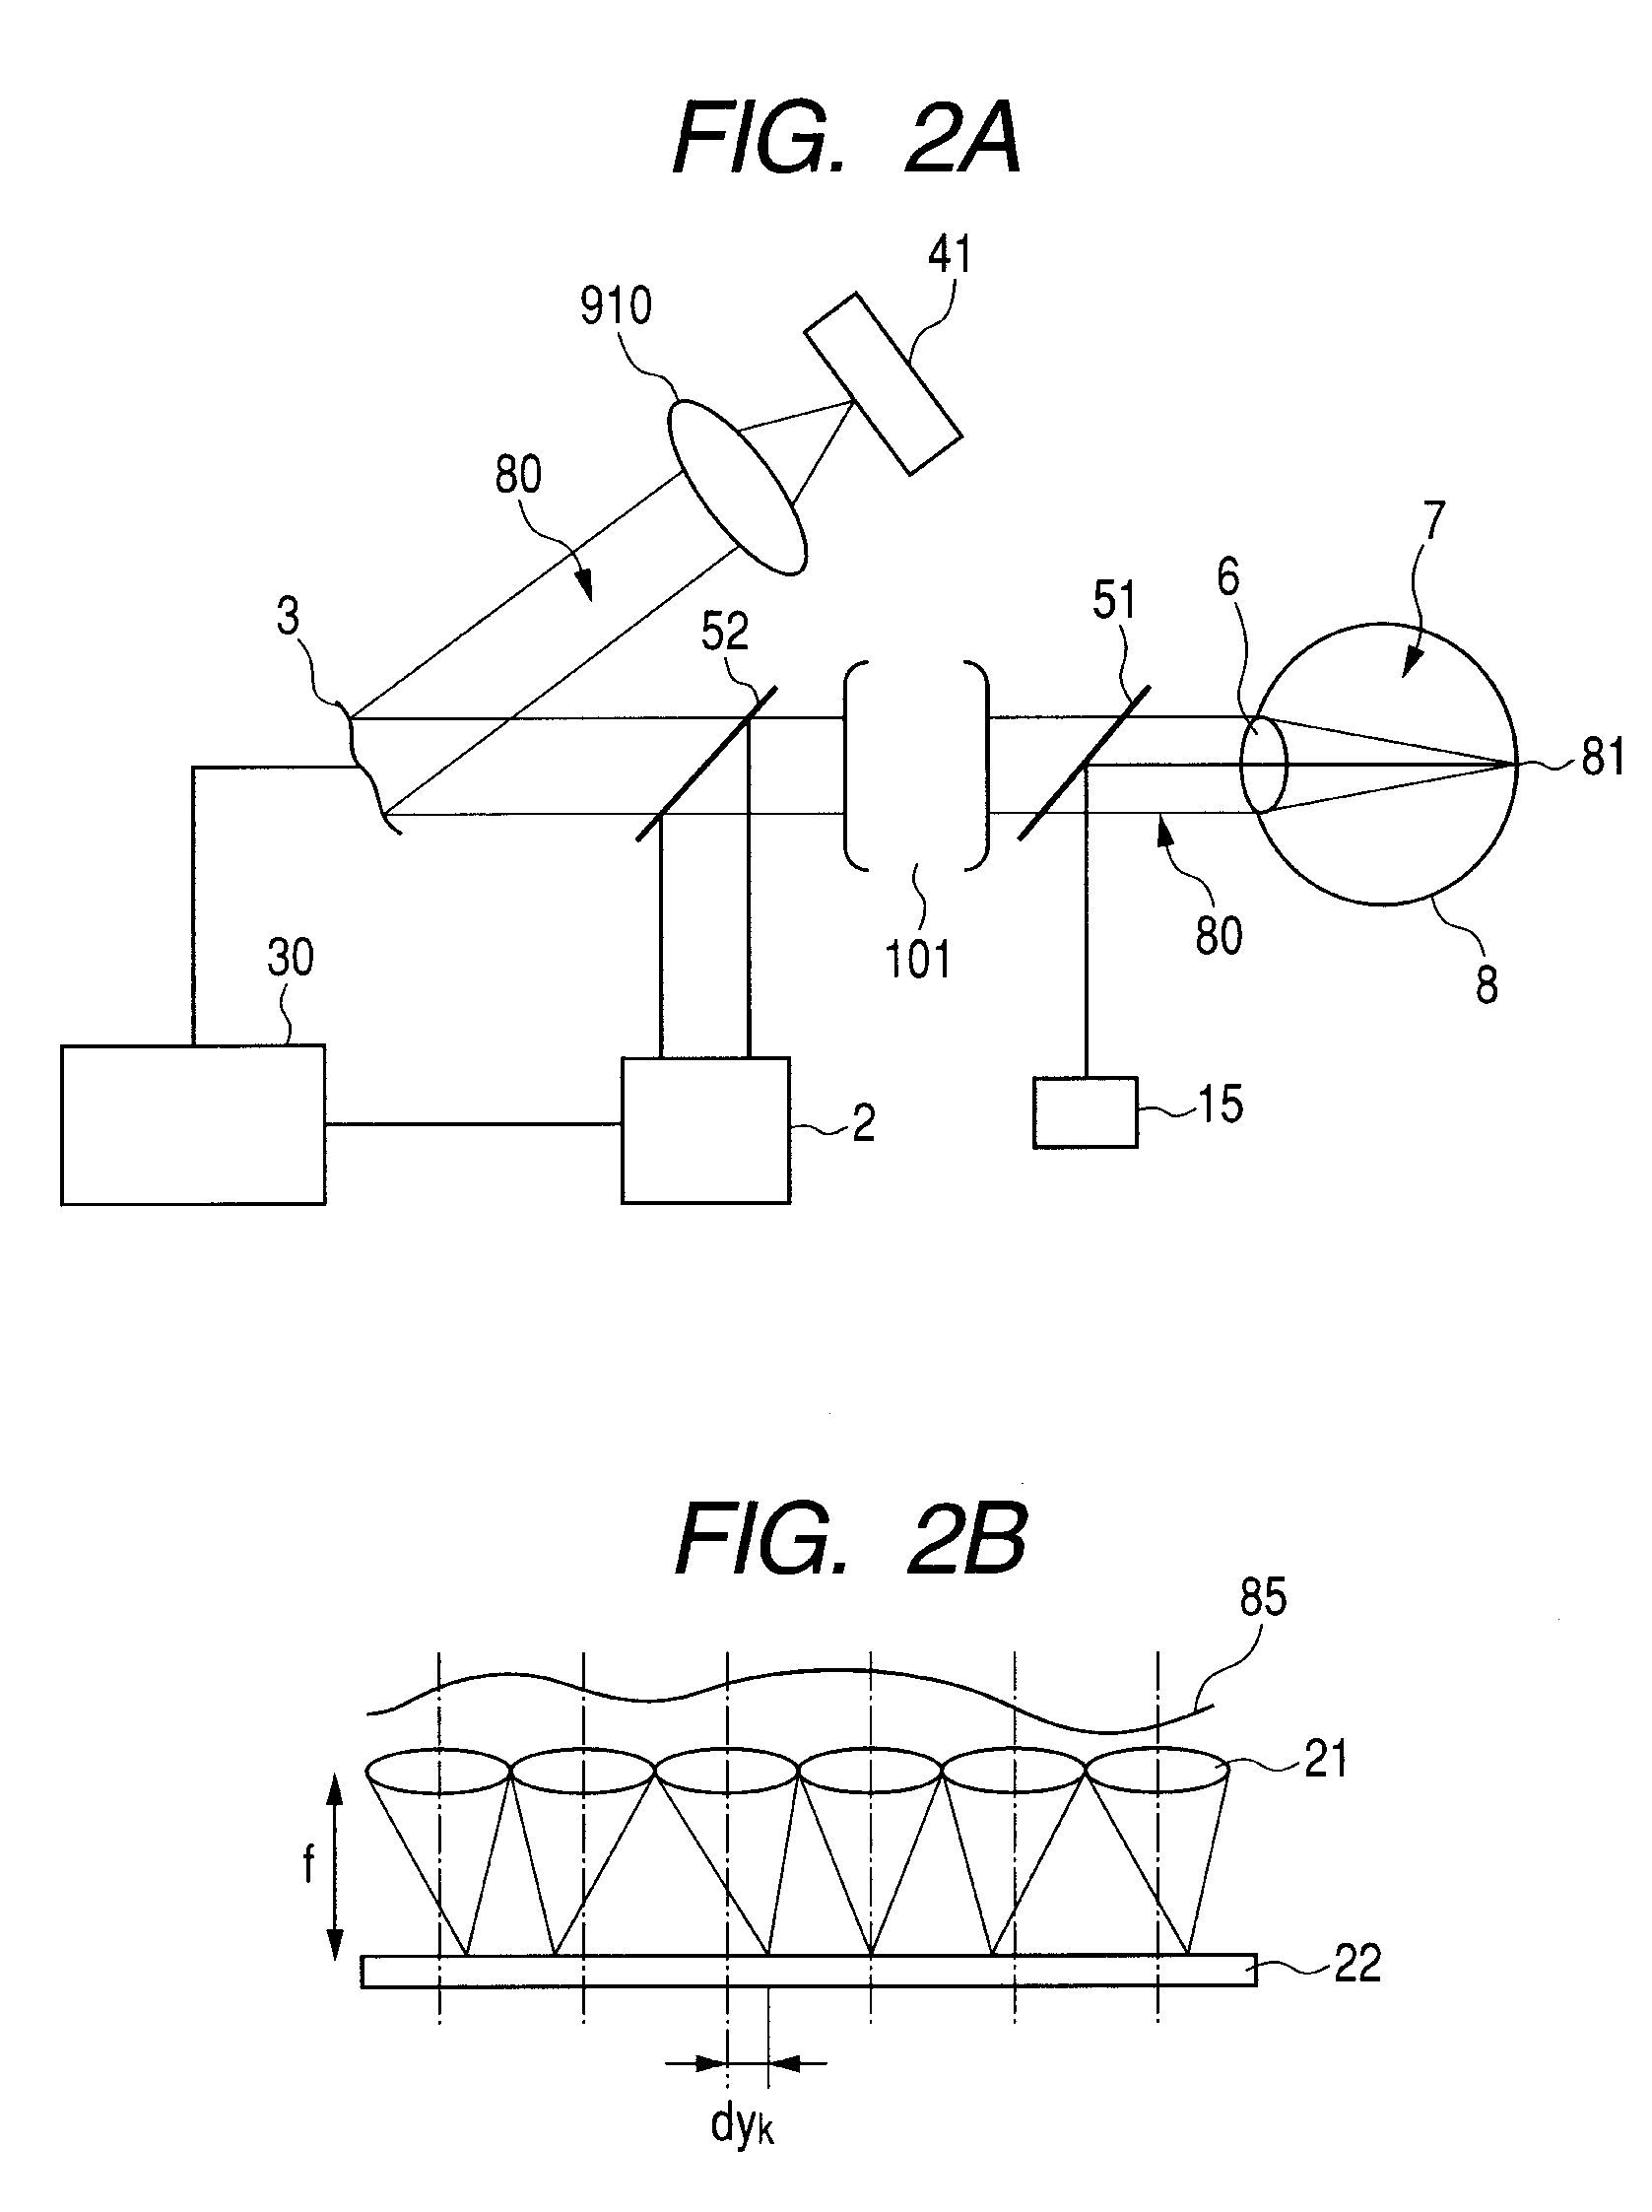 Optical image acquisition apparatus having adaptive optics and control method for the same